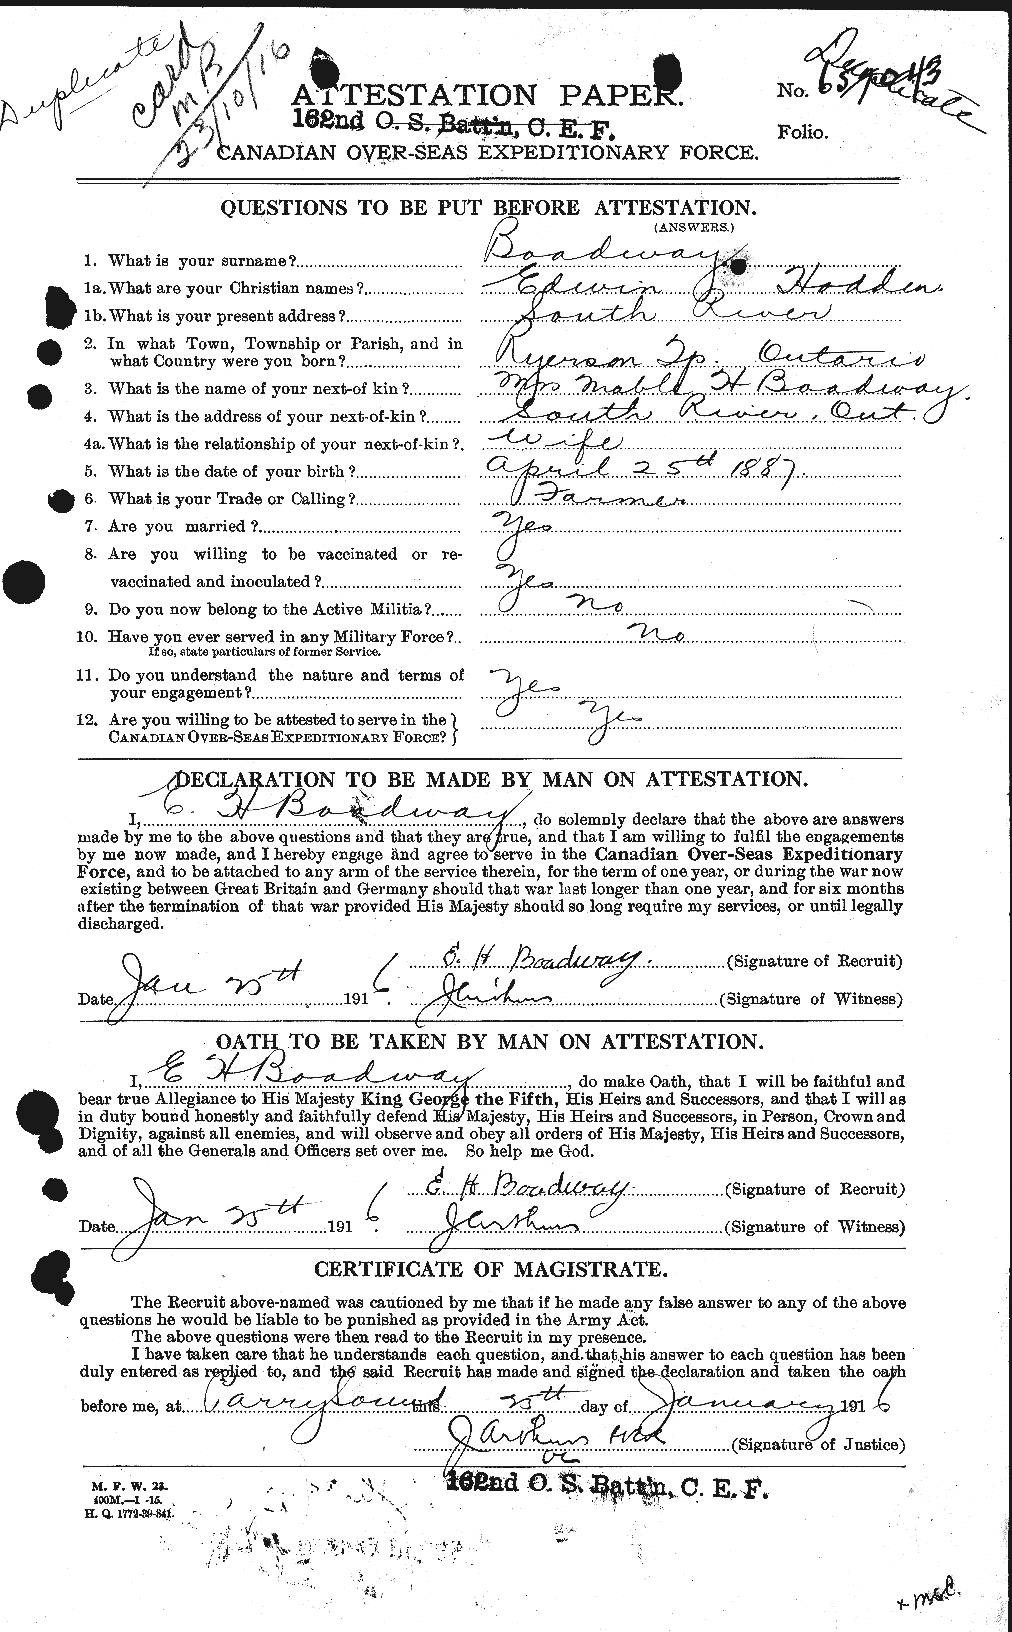 Personnel Records of the First World War - CEF 247344a